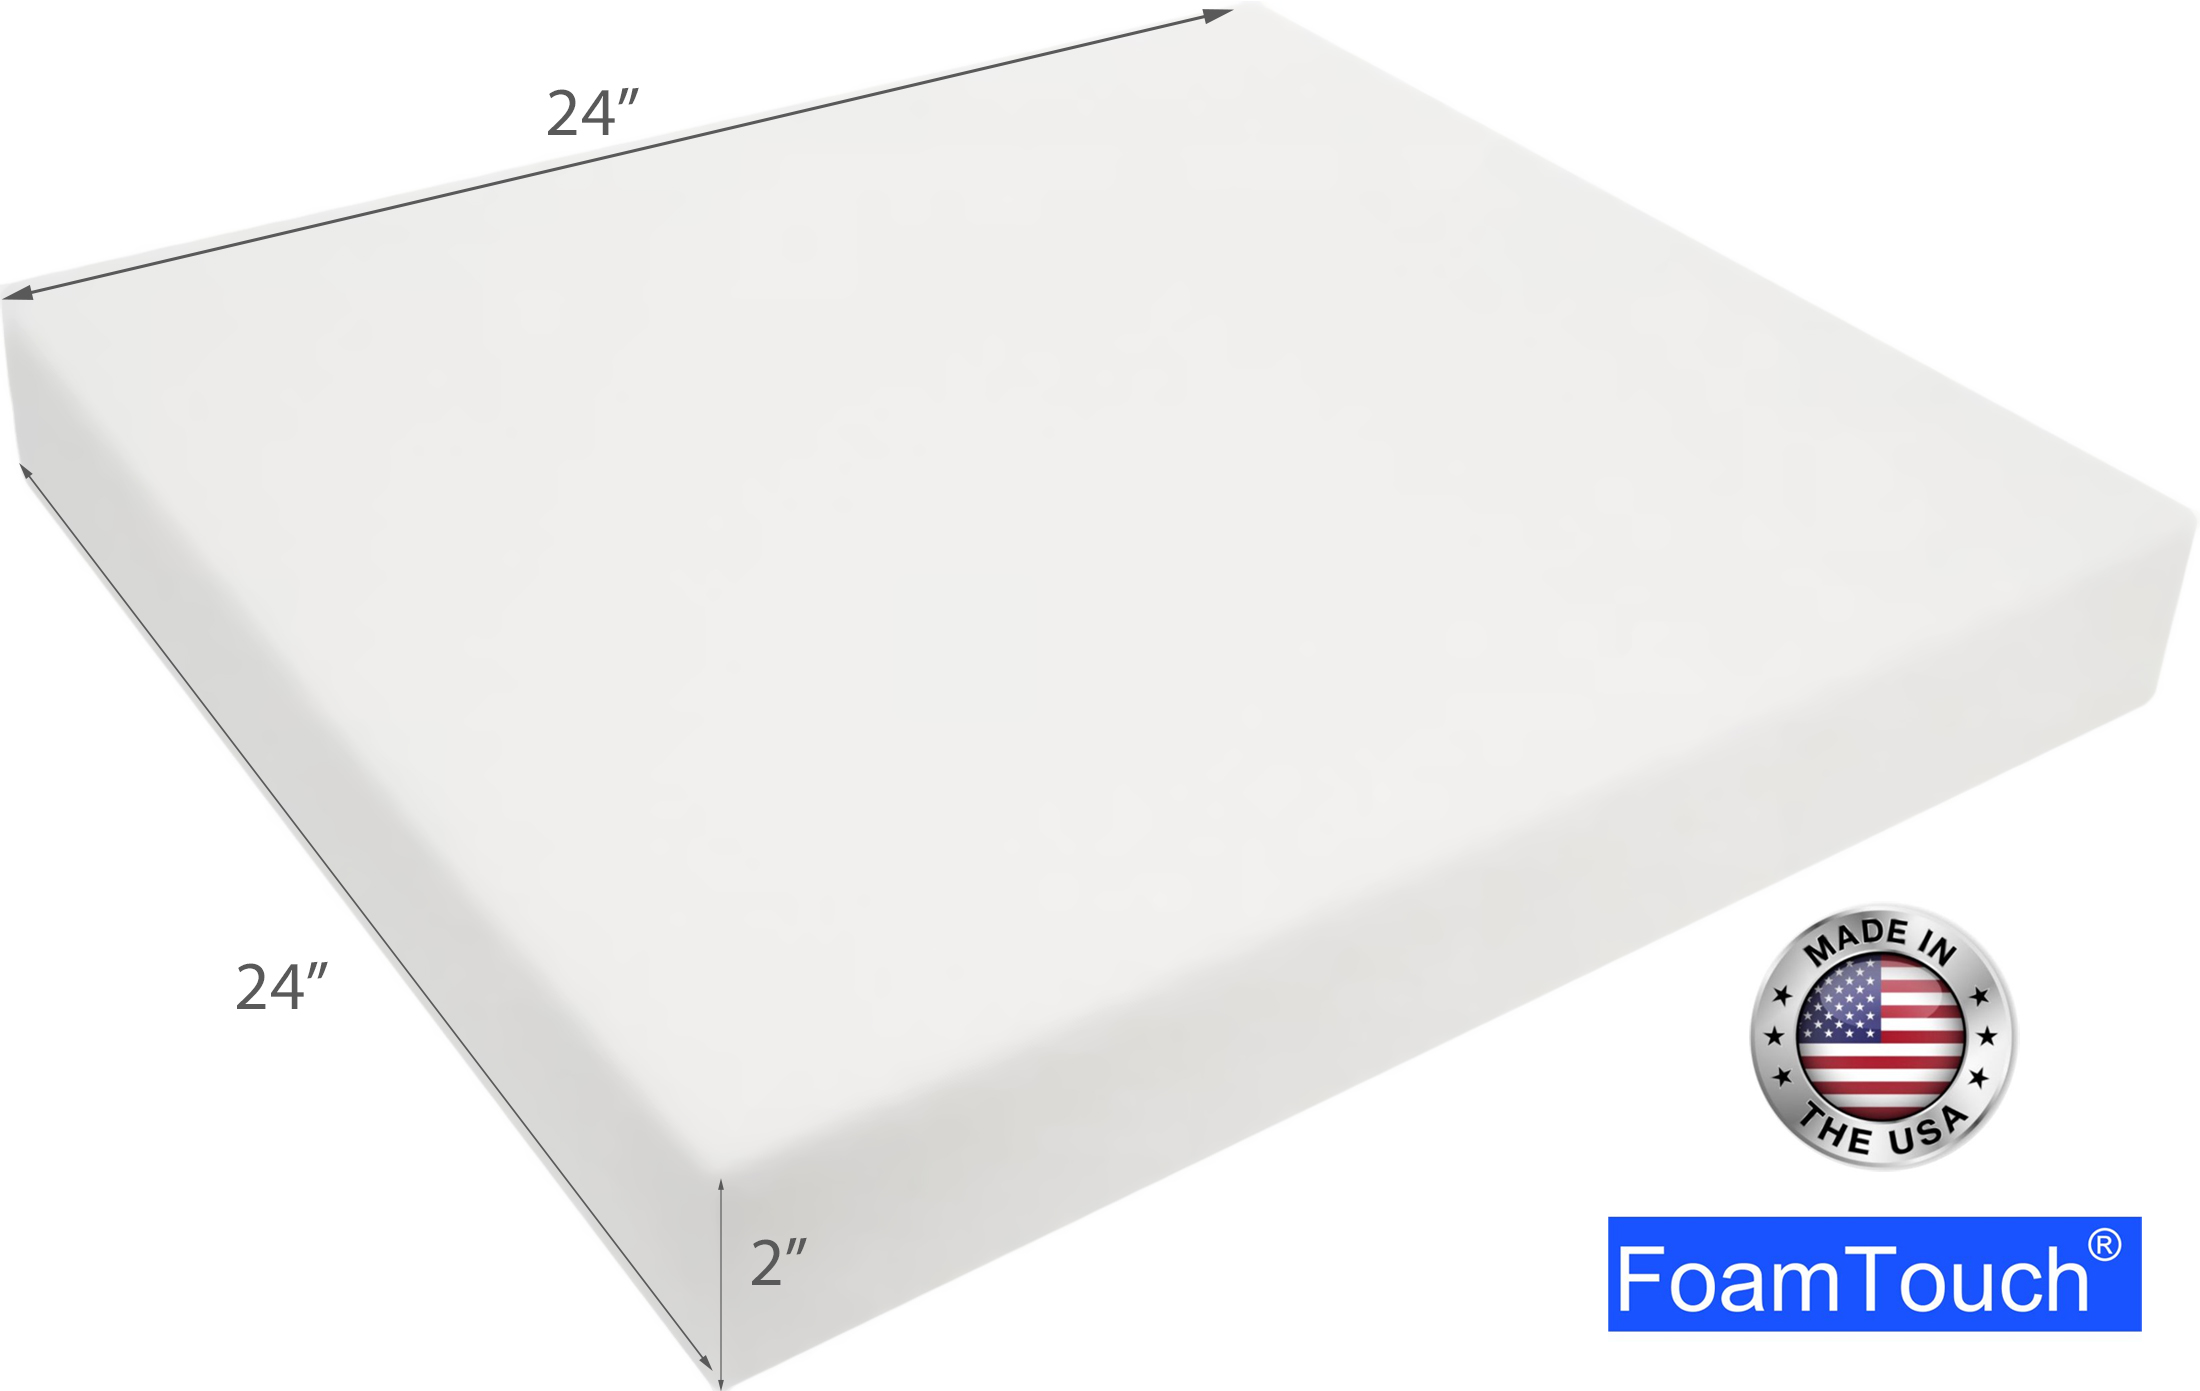 FoamTouch High Density 2 Inches Height, 24 Inches Width, 24 Inches Length Upholstery Foam, Size: 2x24x24HDF, White